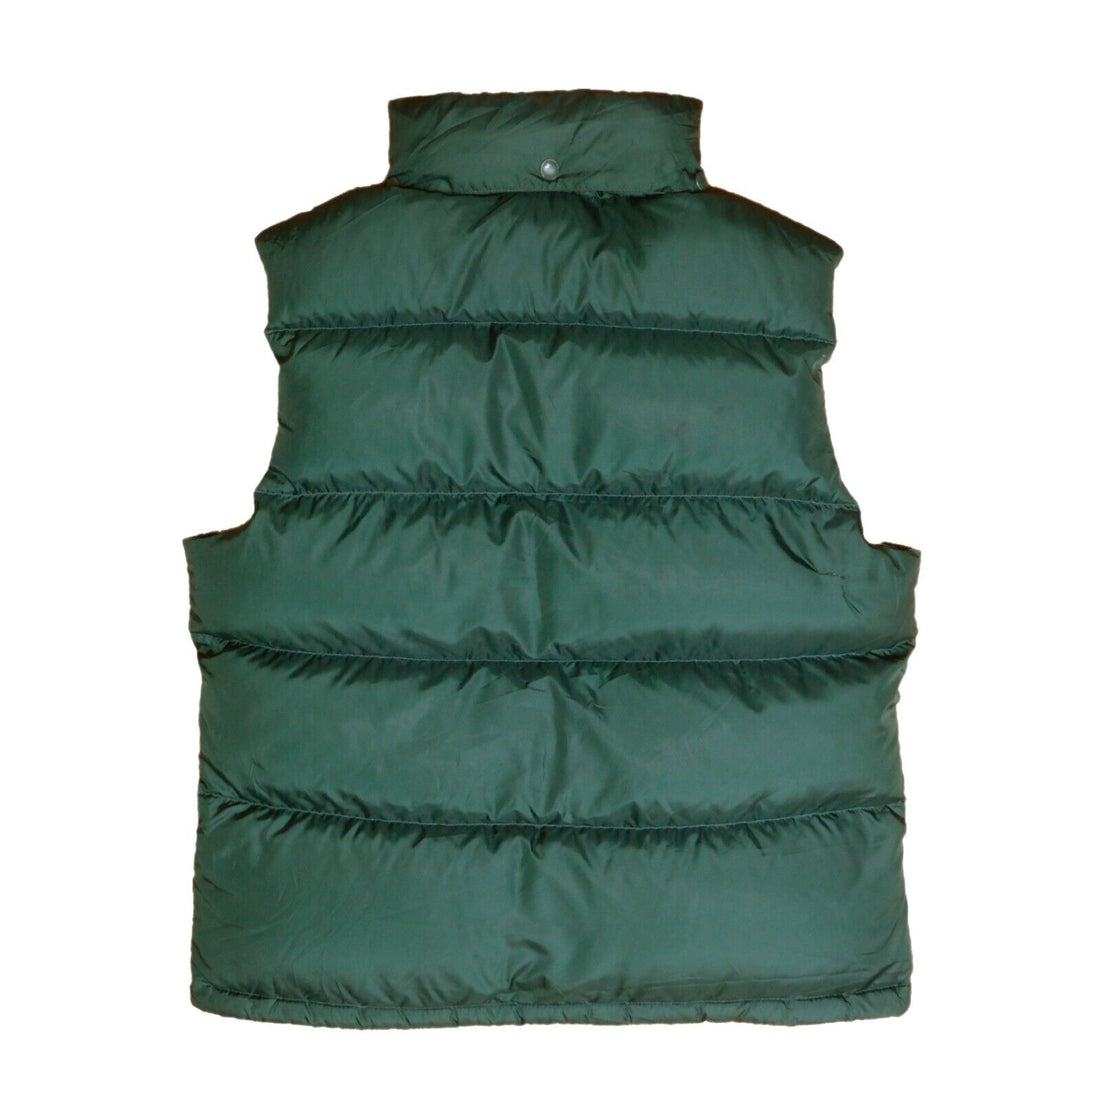 Vintage Polo Ralph Lauren Puffer Vest Size Large Green 90s Down Insulated